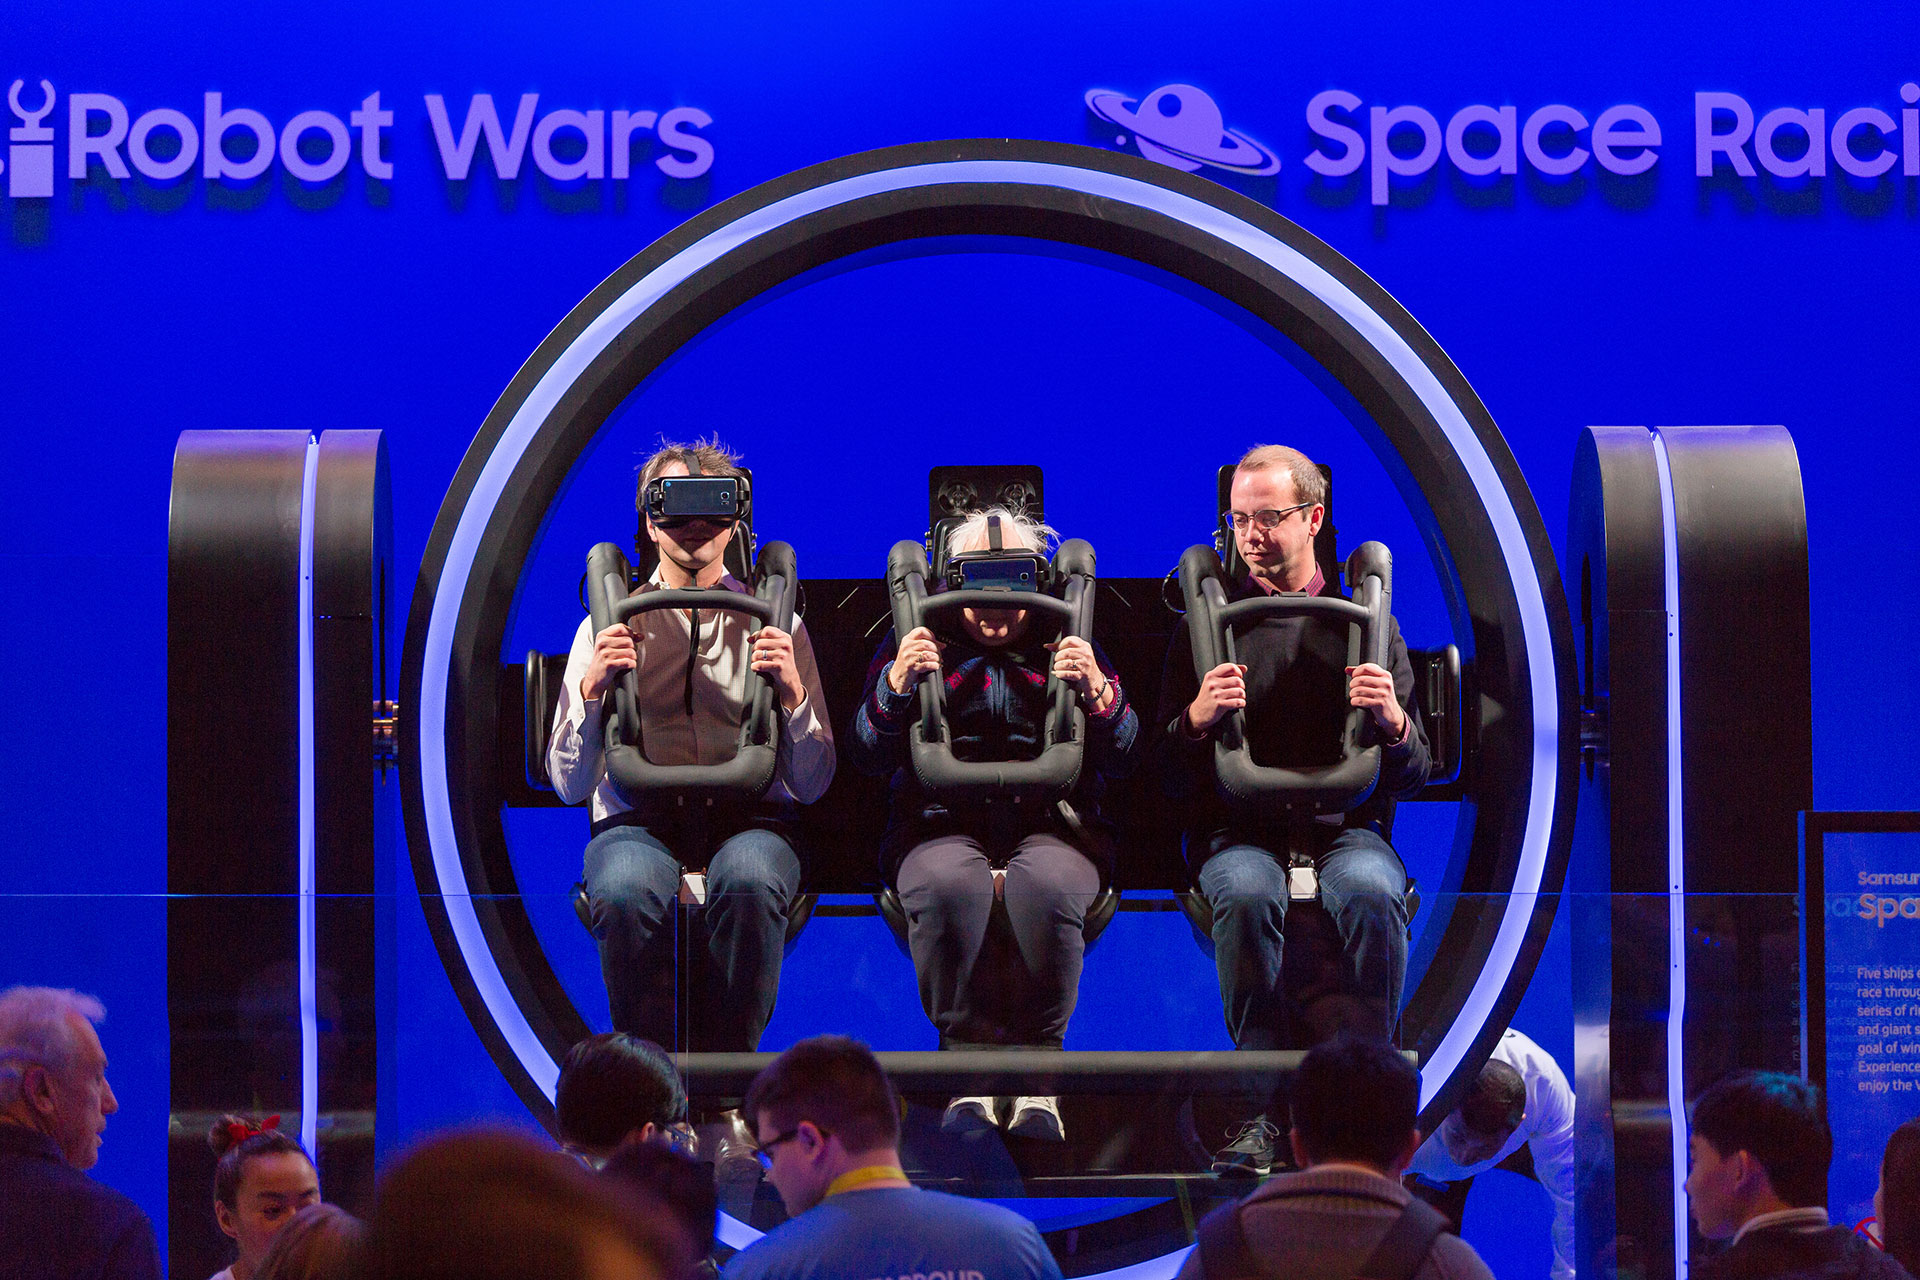 A three-person circular virtual reality ride with two men and an elderly woman seated in the center in front of a blue background which says Robot Wars and Space Racing and a small crowd in front.